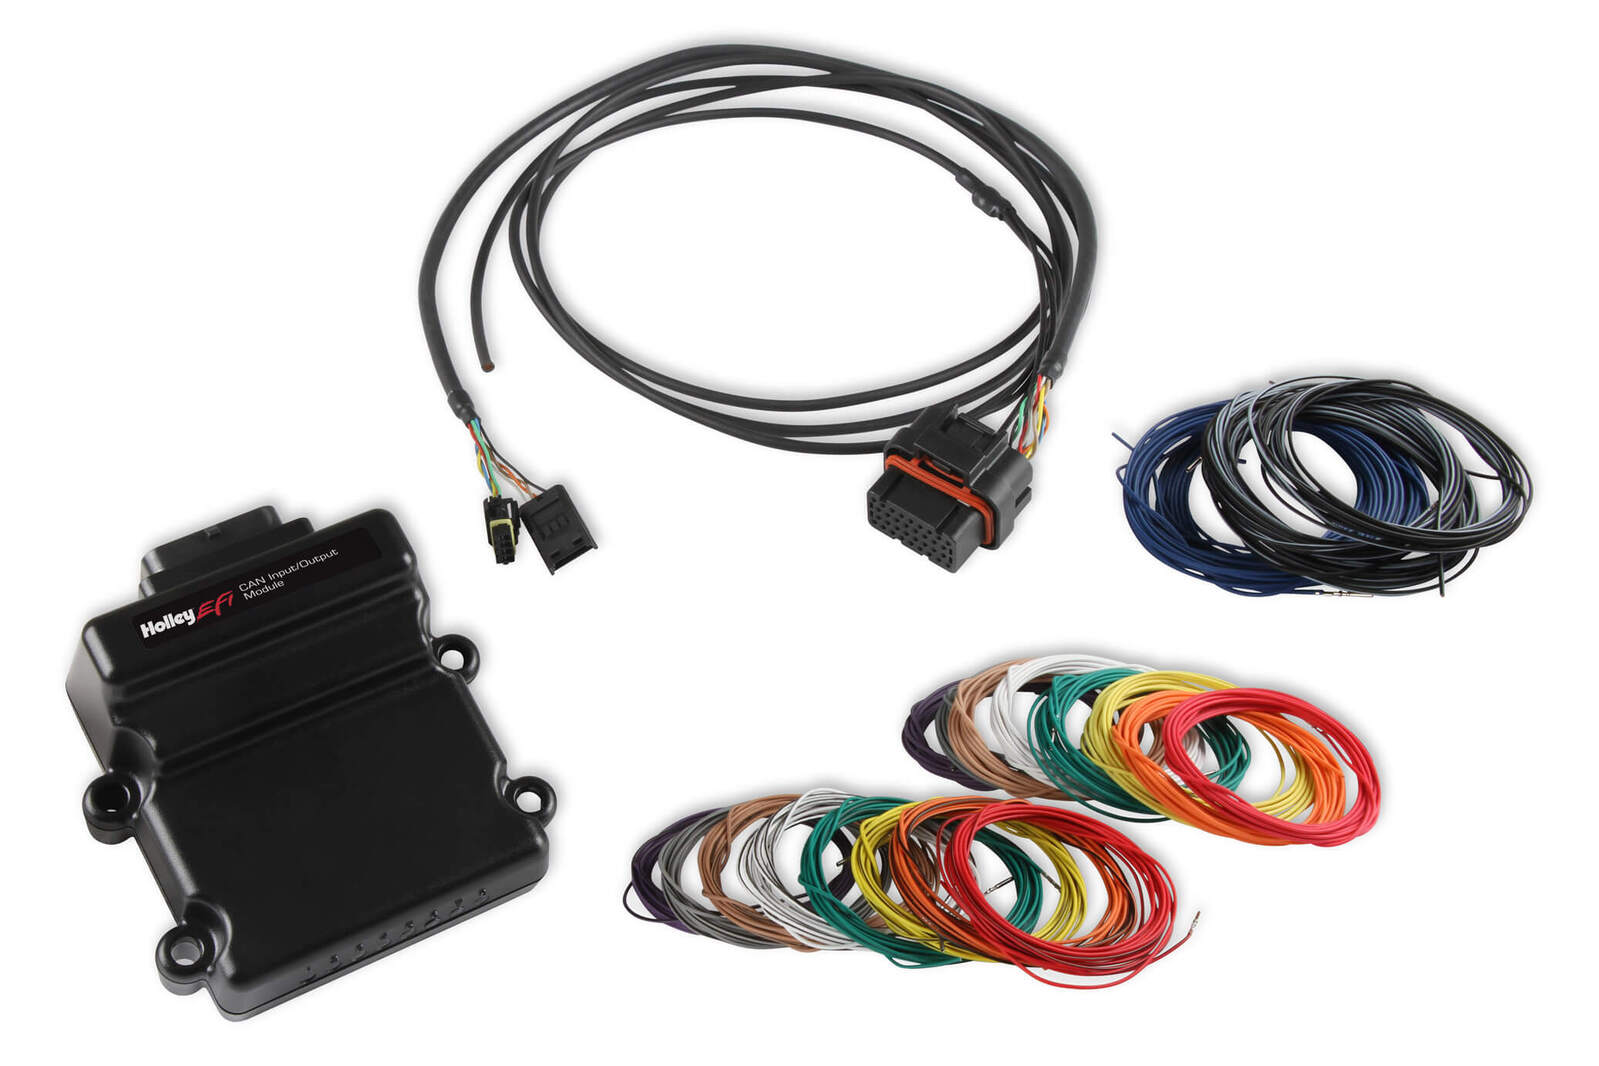 Holley EFI Input/Output Module, Can, W/ Harness